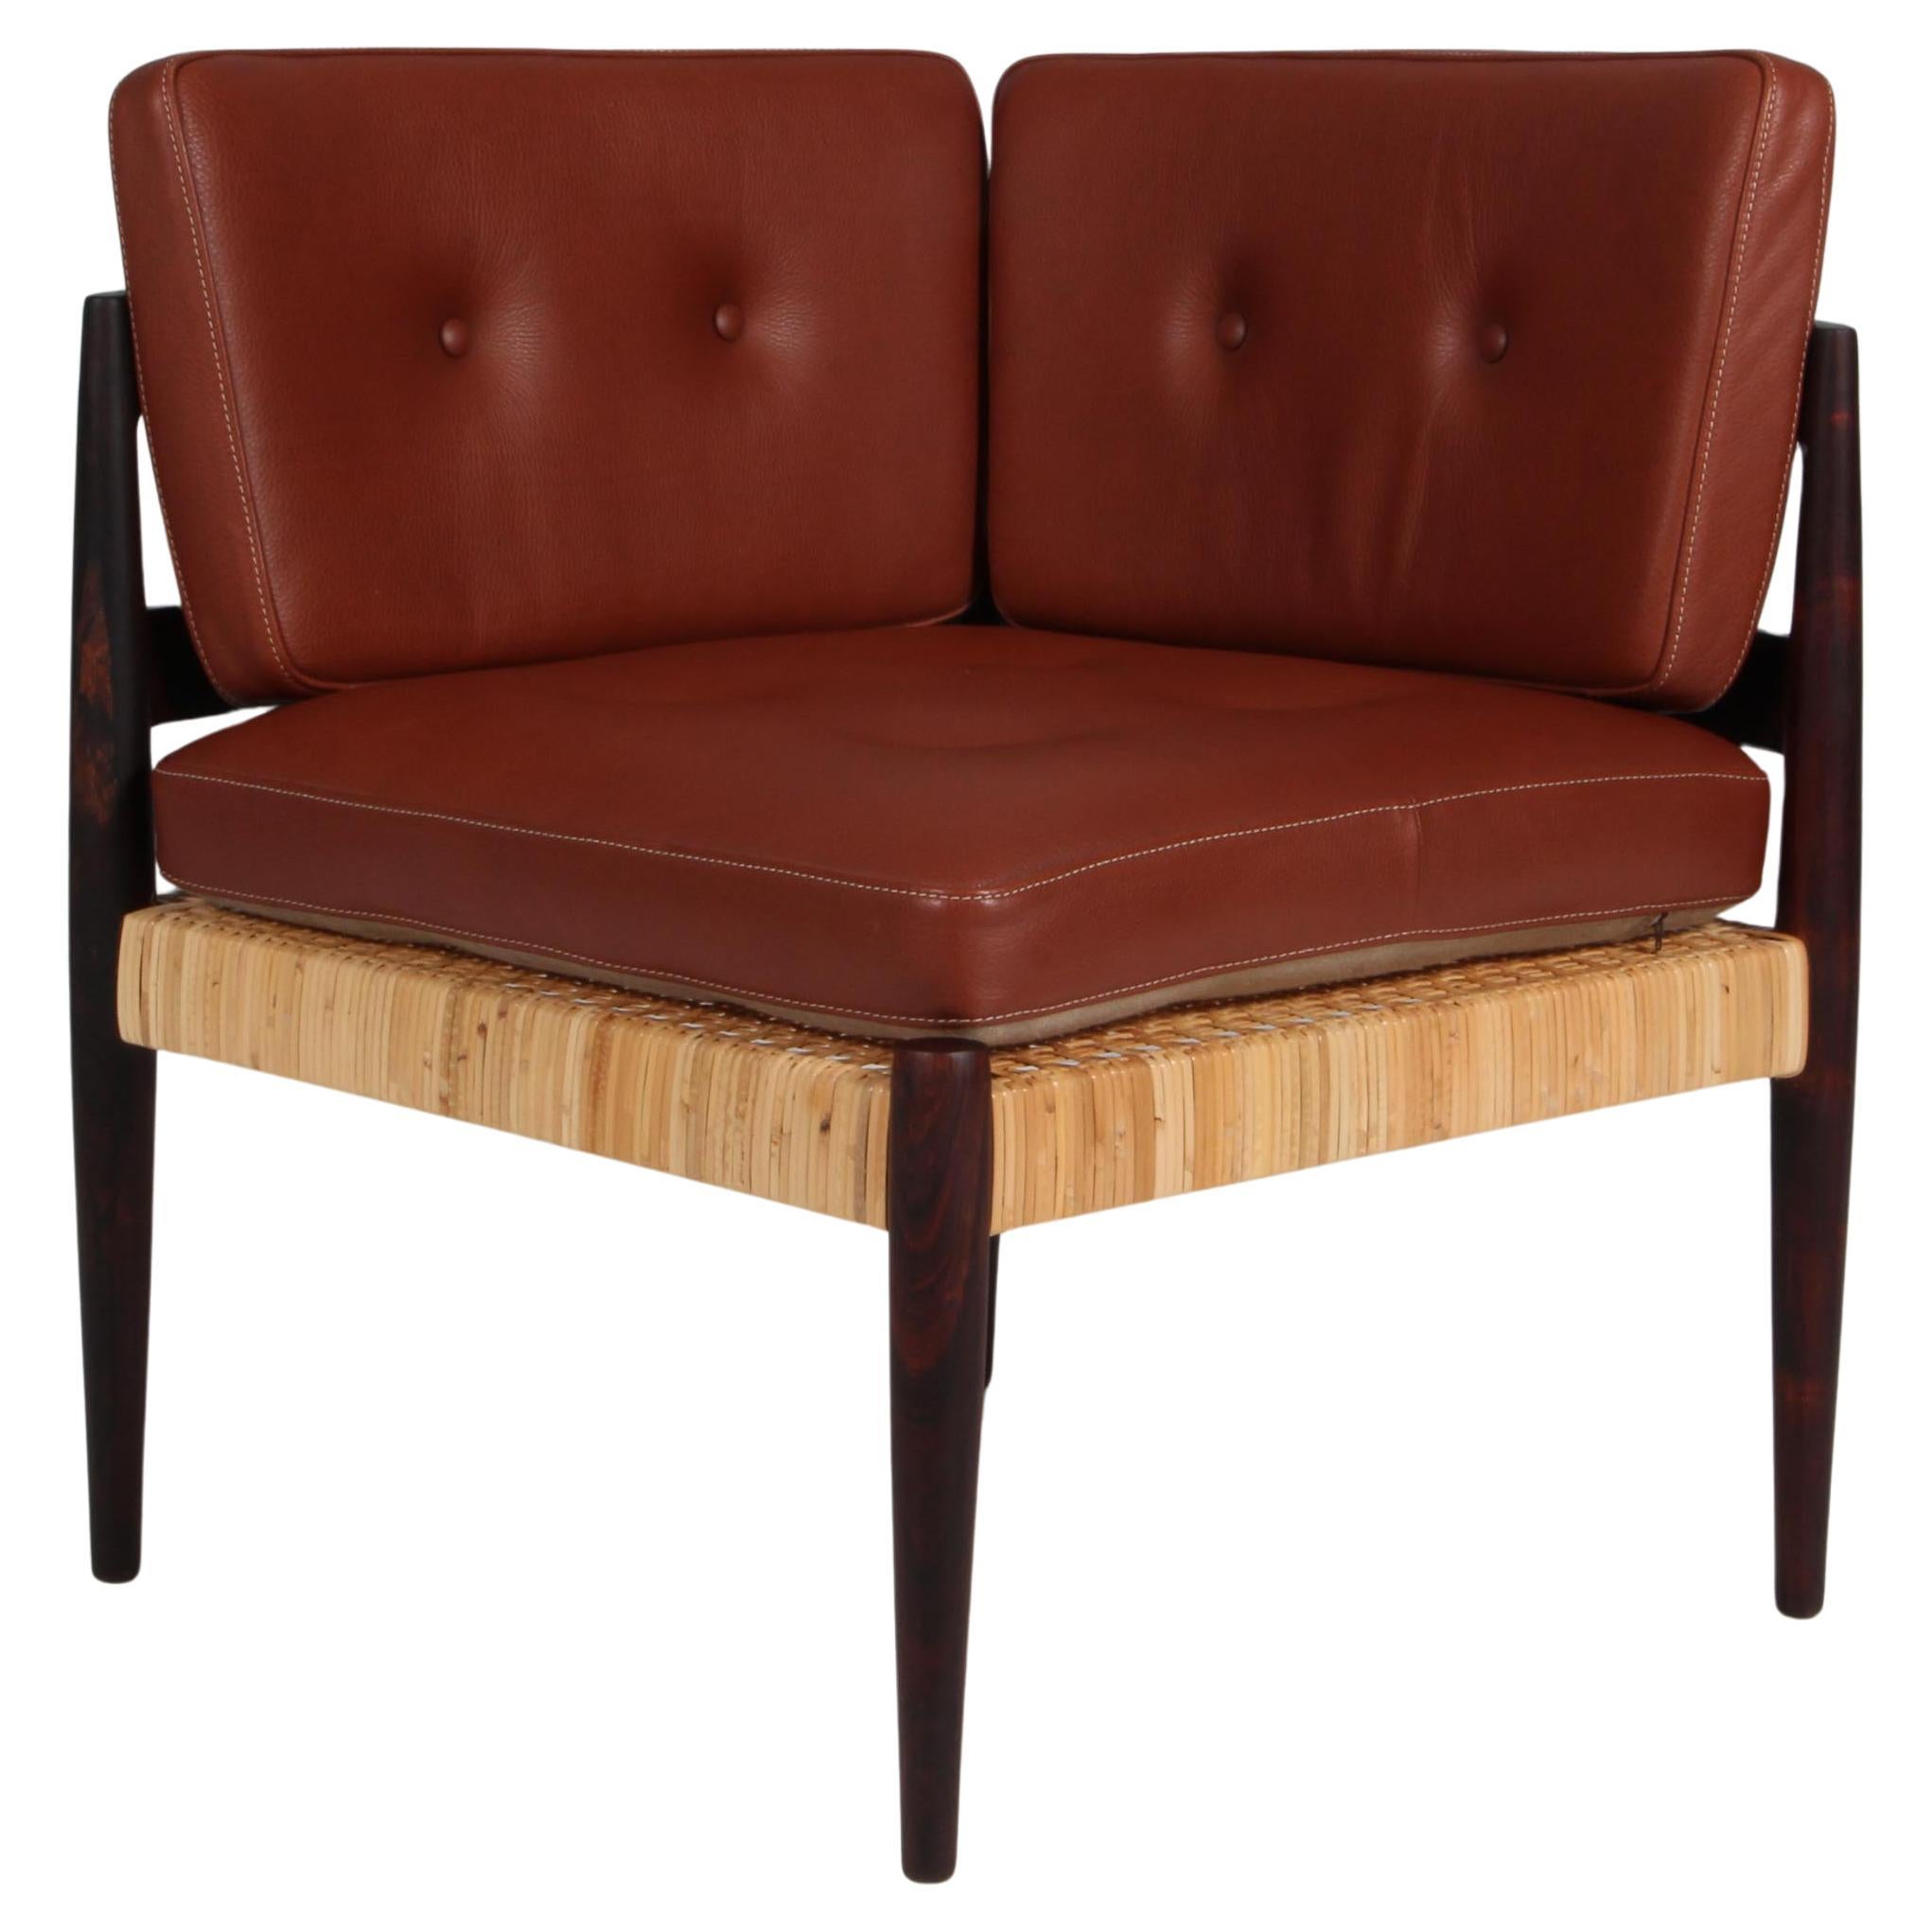 Kai Kristiansen Univers corner chair in leather, cane and rosewood